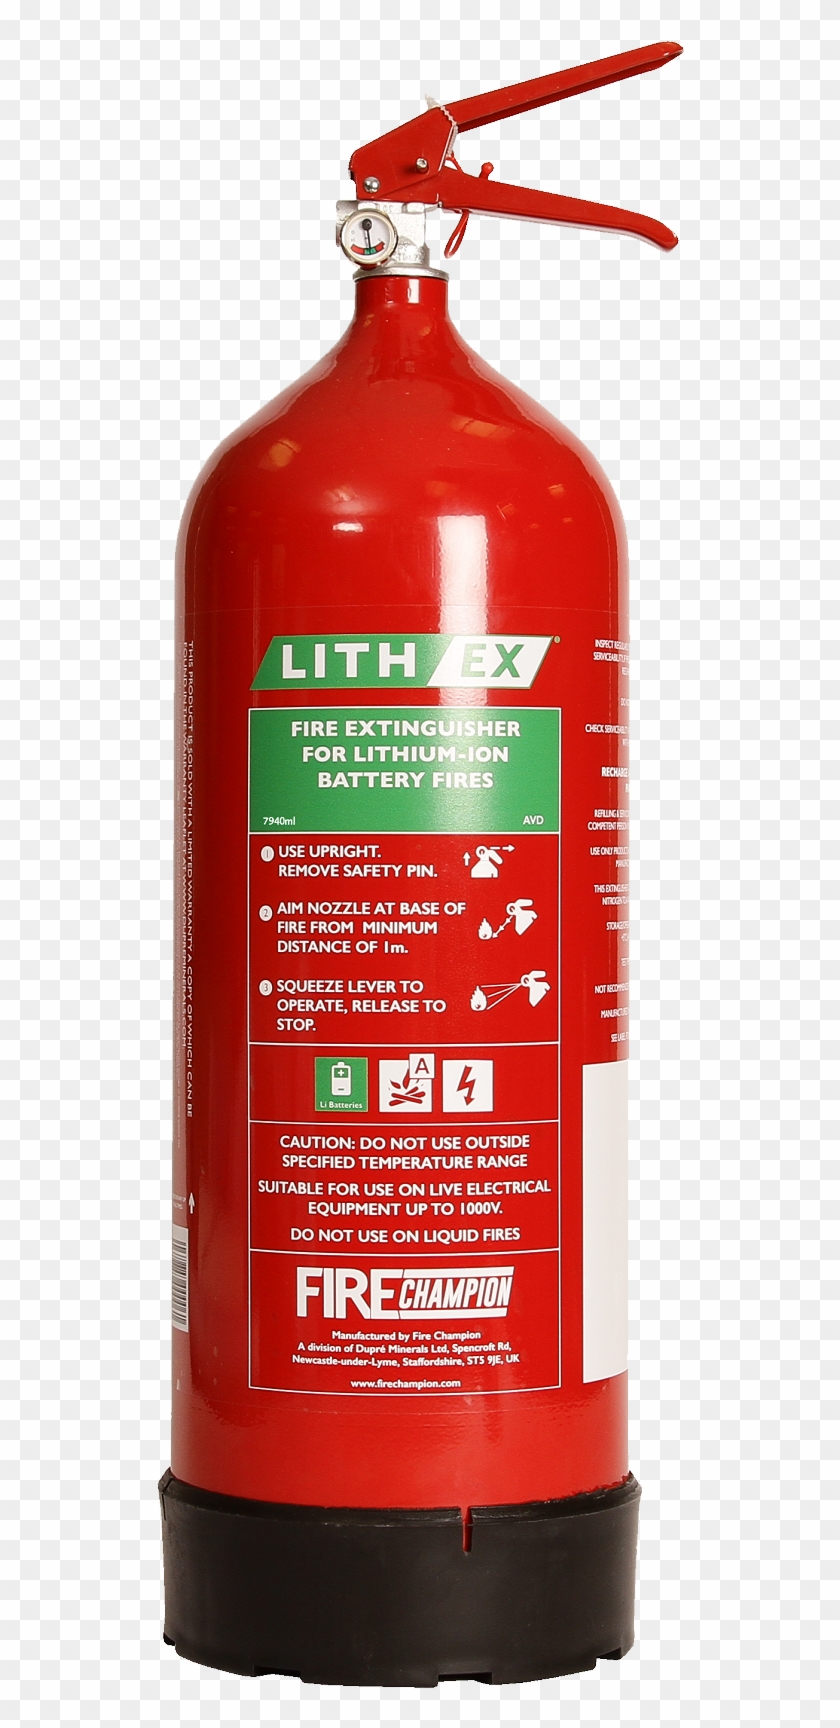 Extinguishers - Lithium Battery Fire Extinguisher Lion Battery Fire #593016